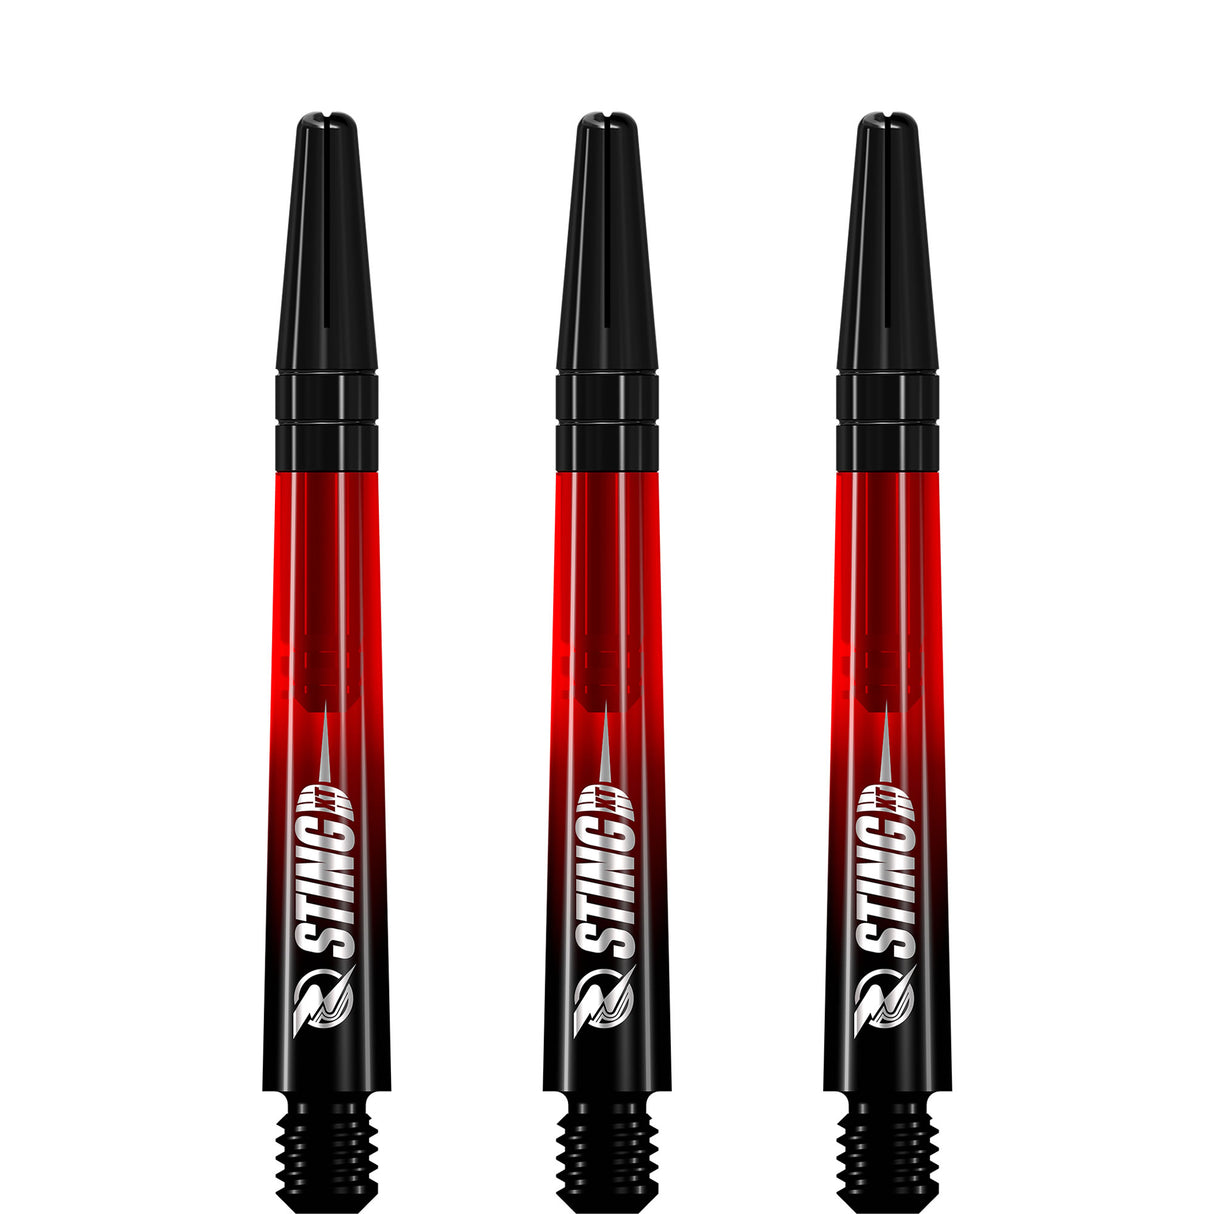 Ruthless Sting XT Dart Shafts - Polycarbonate - Gradient Black & Red - Black Top